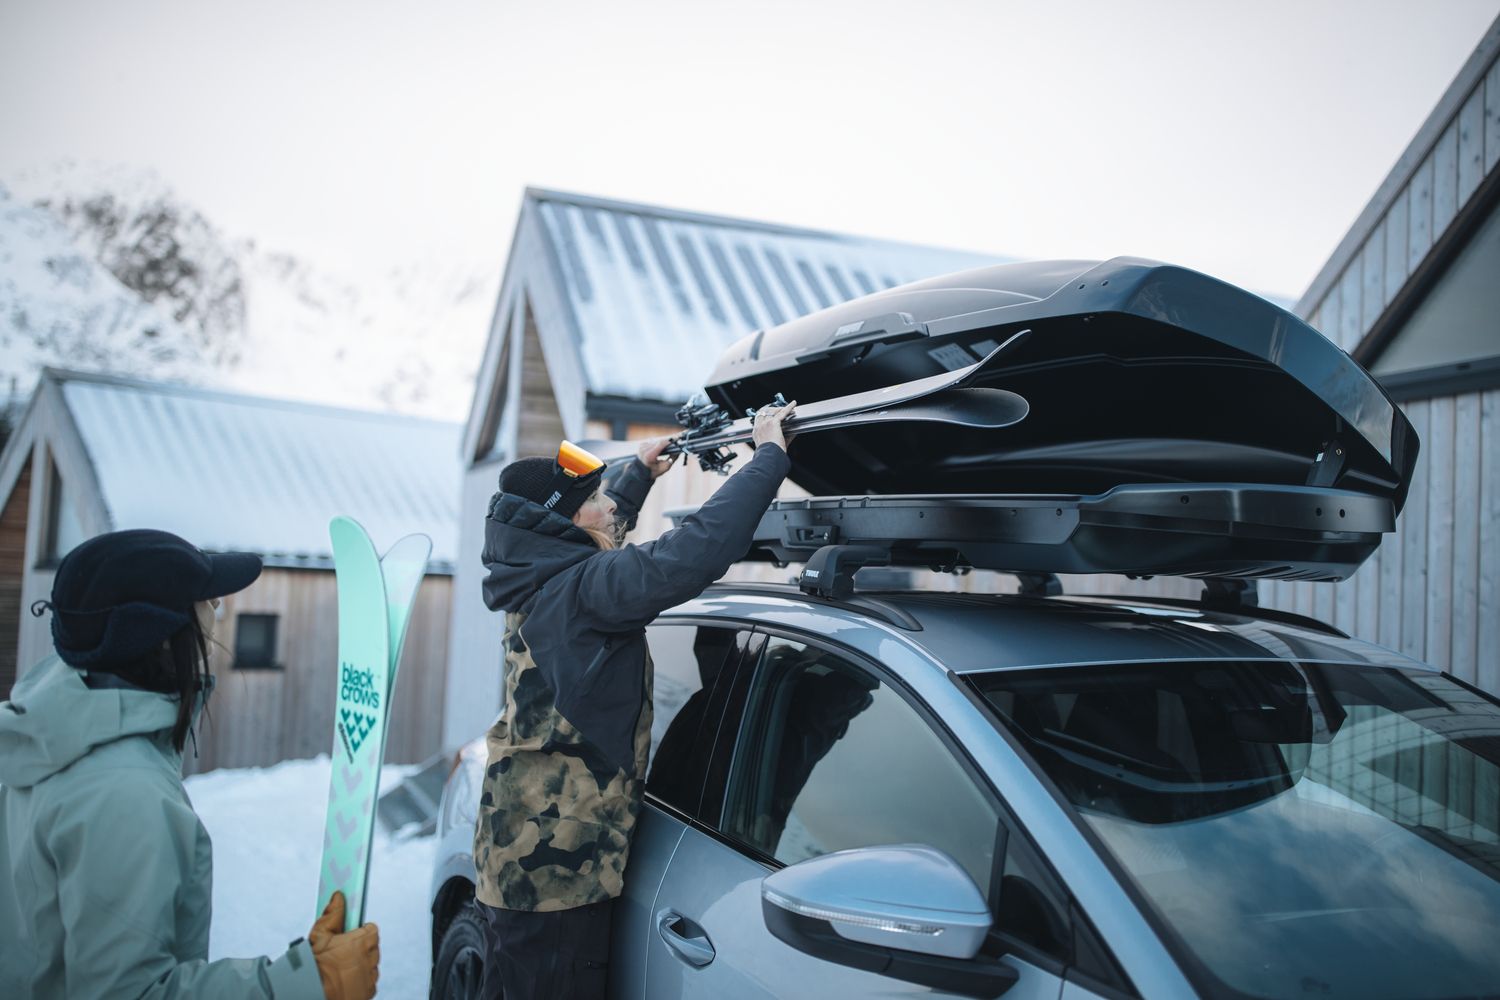 skis and snowboards being loaded into a roof mounted cargo box